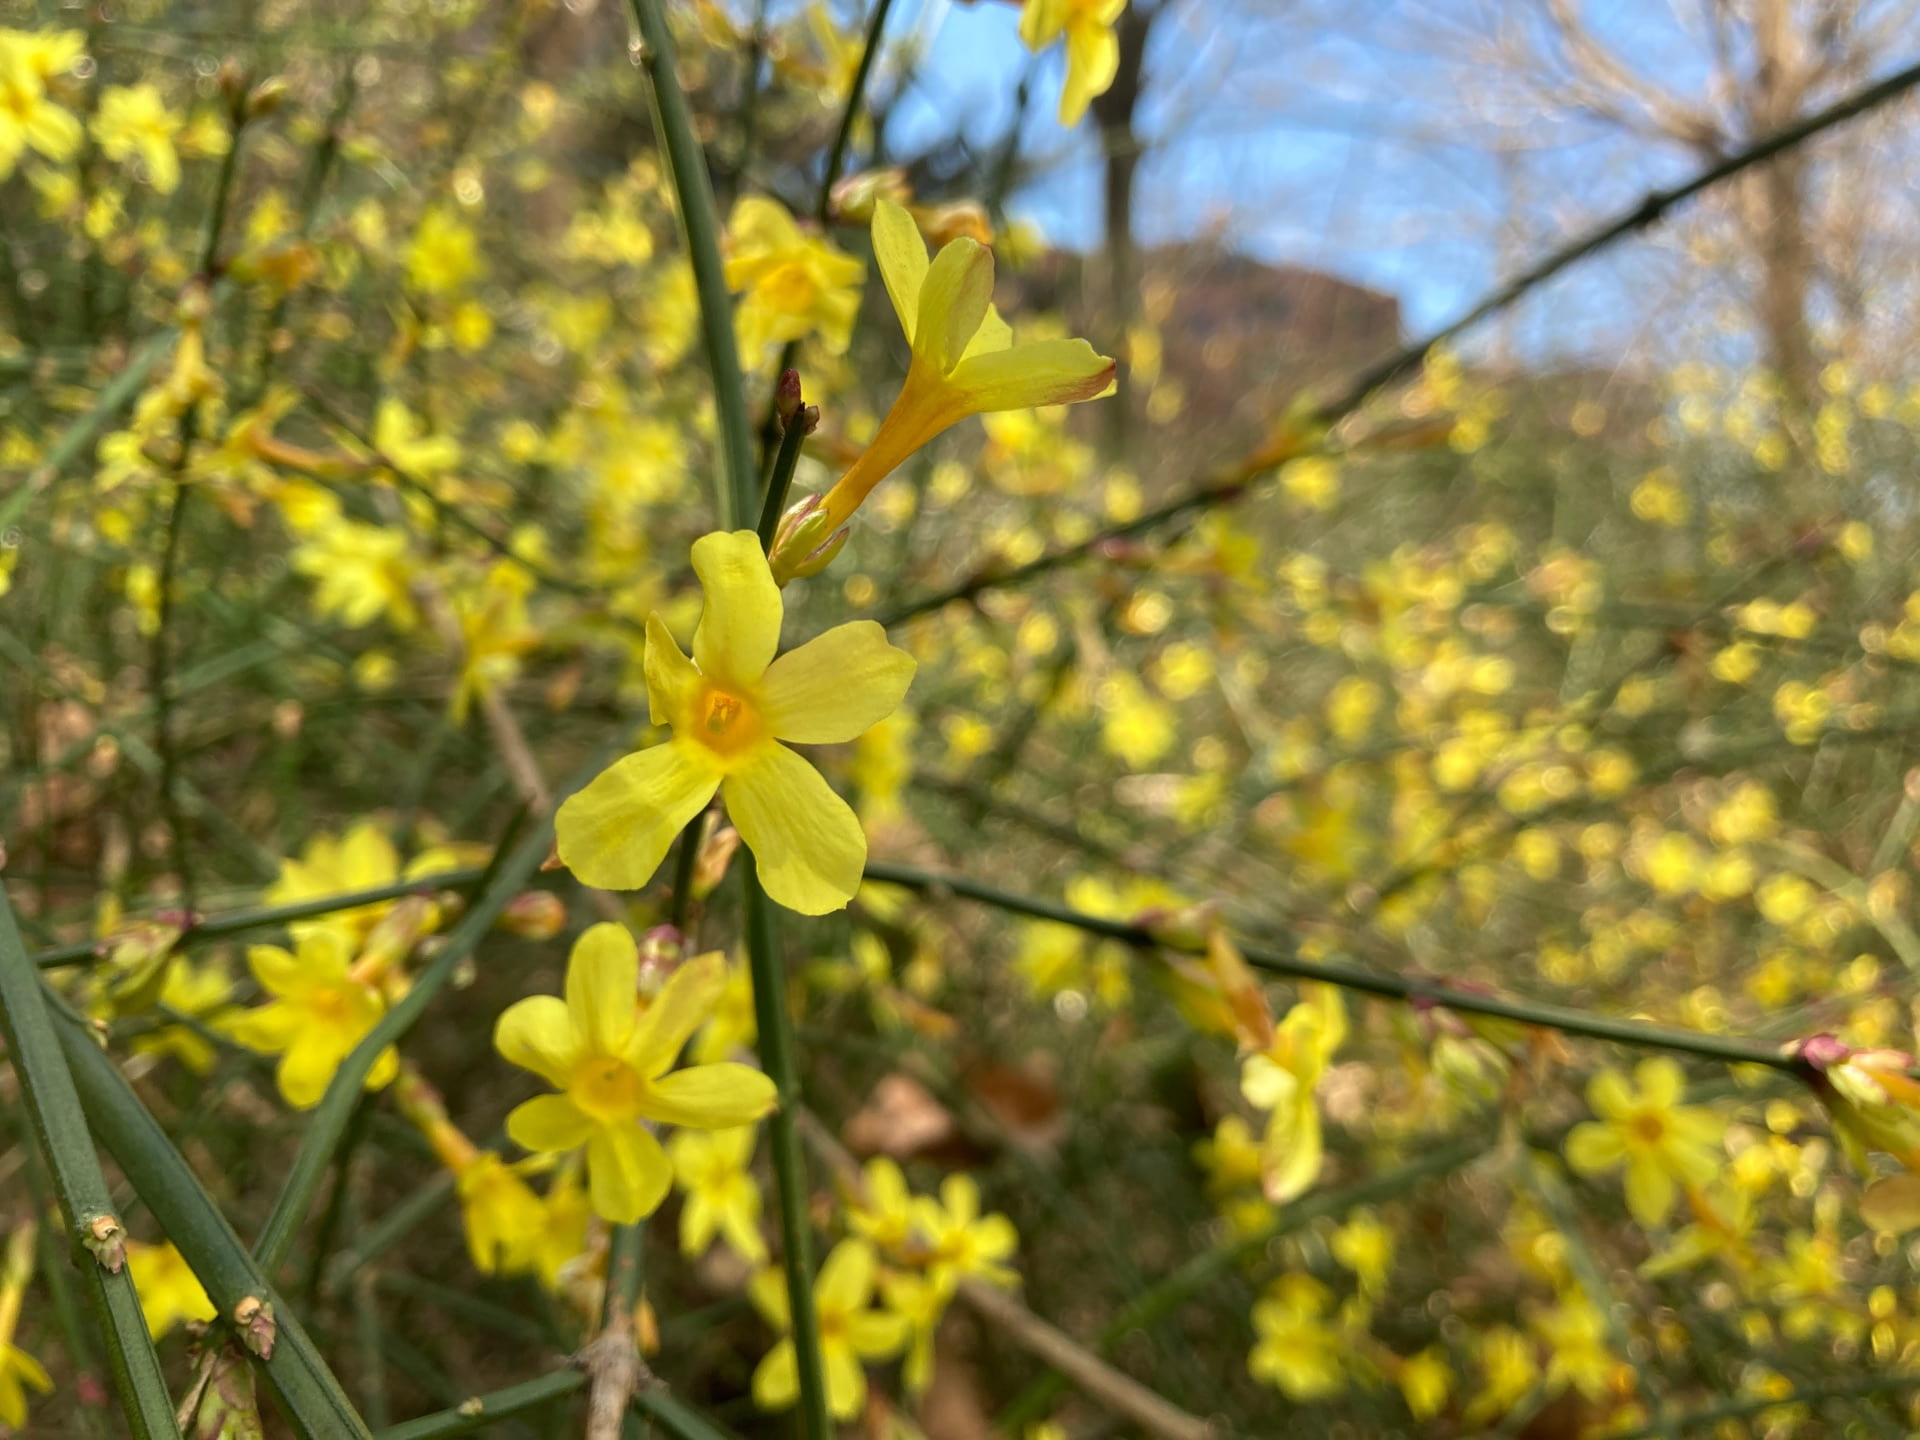 A closer view of the early blooming Jasminum nudiflorum flowers.